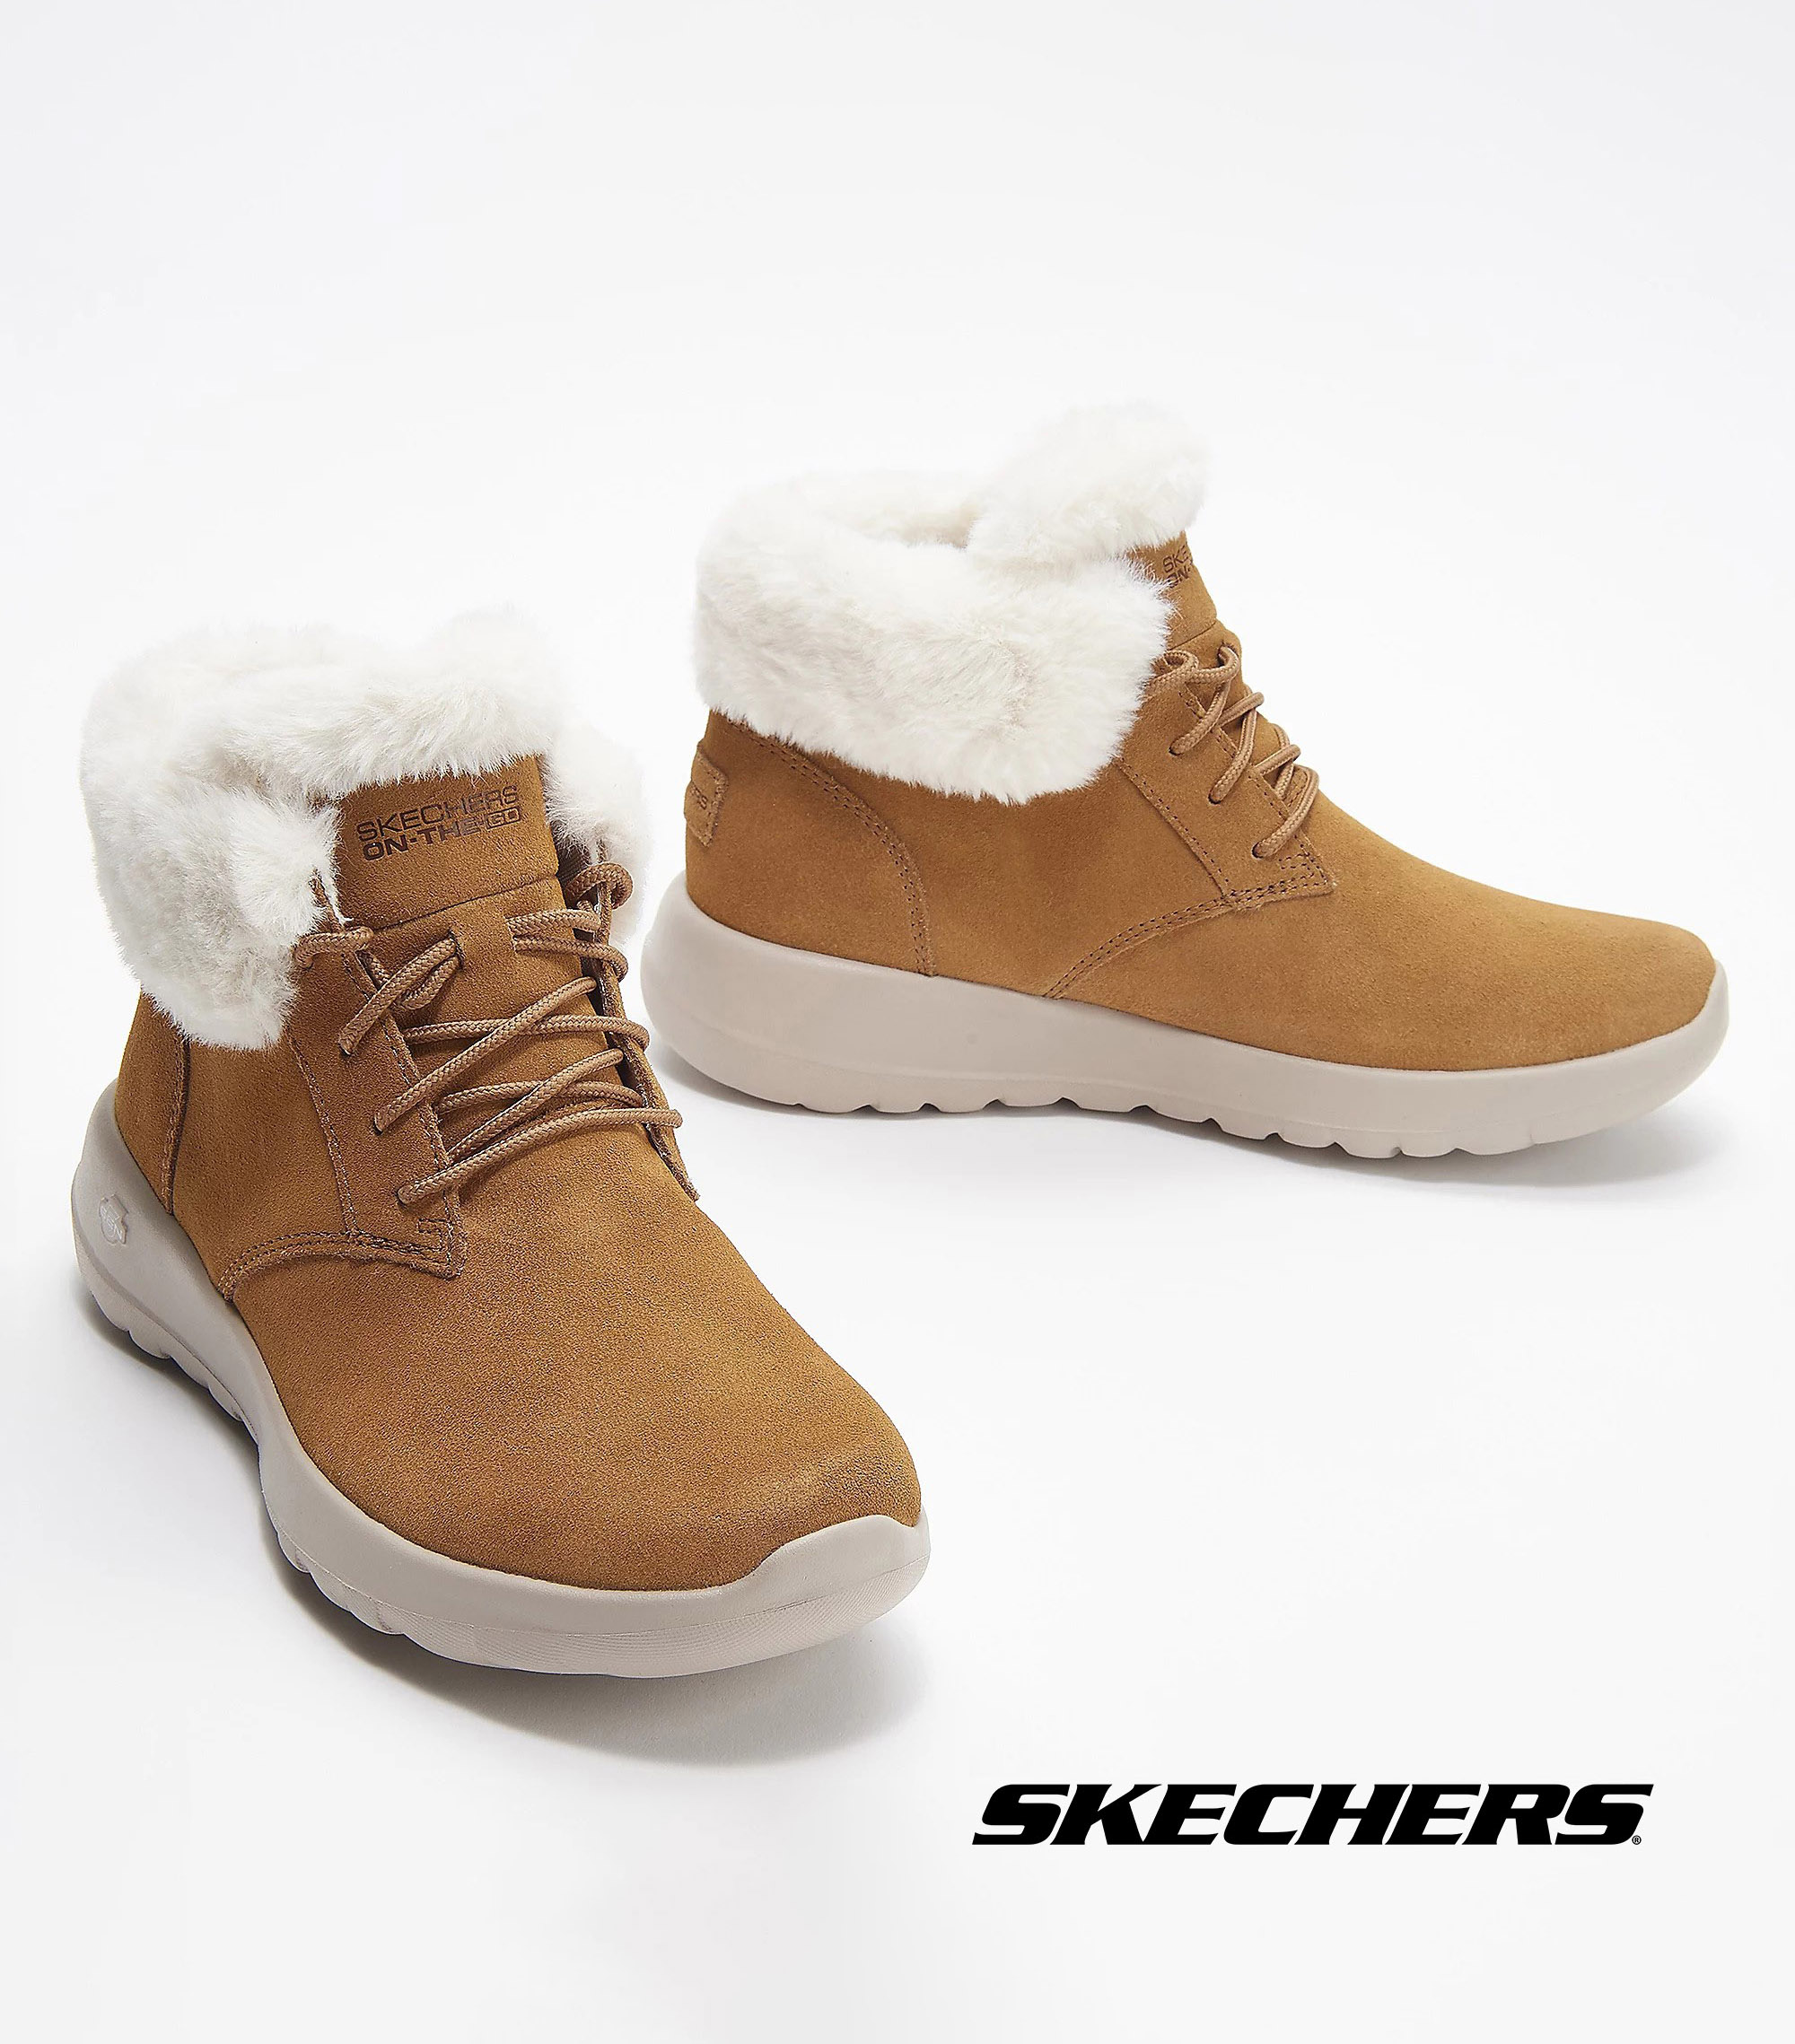 SKECHERS collection